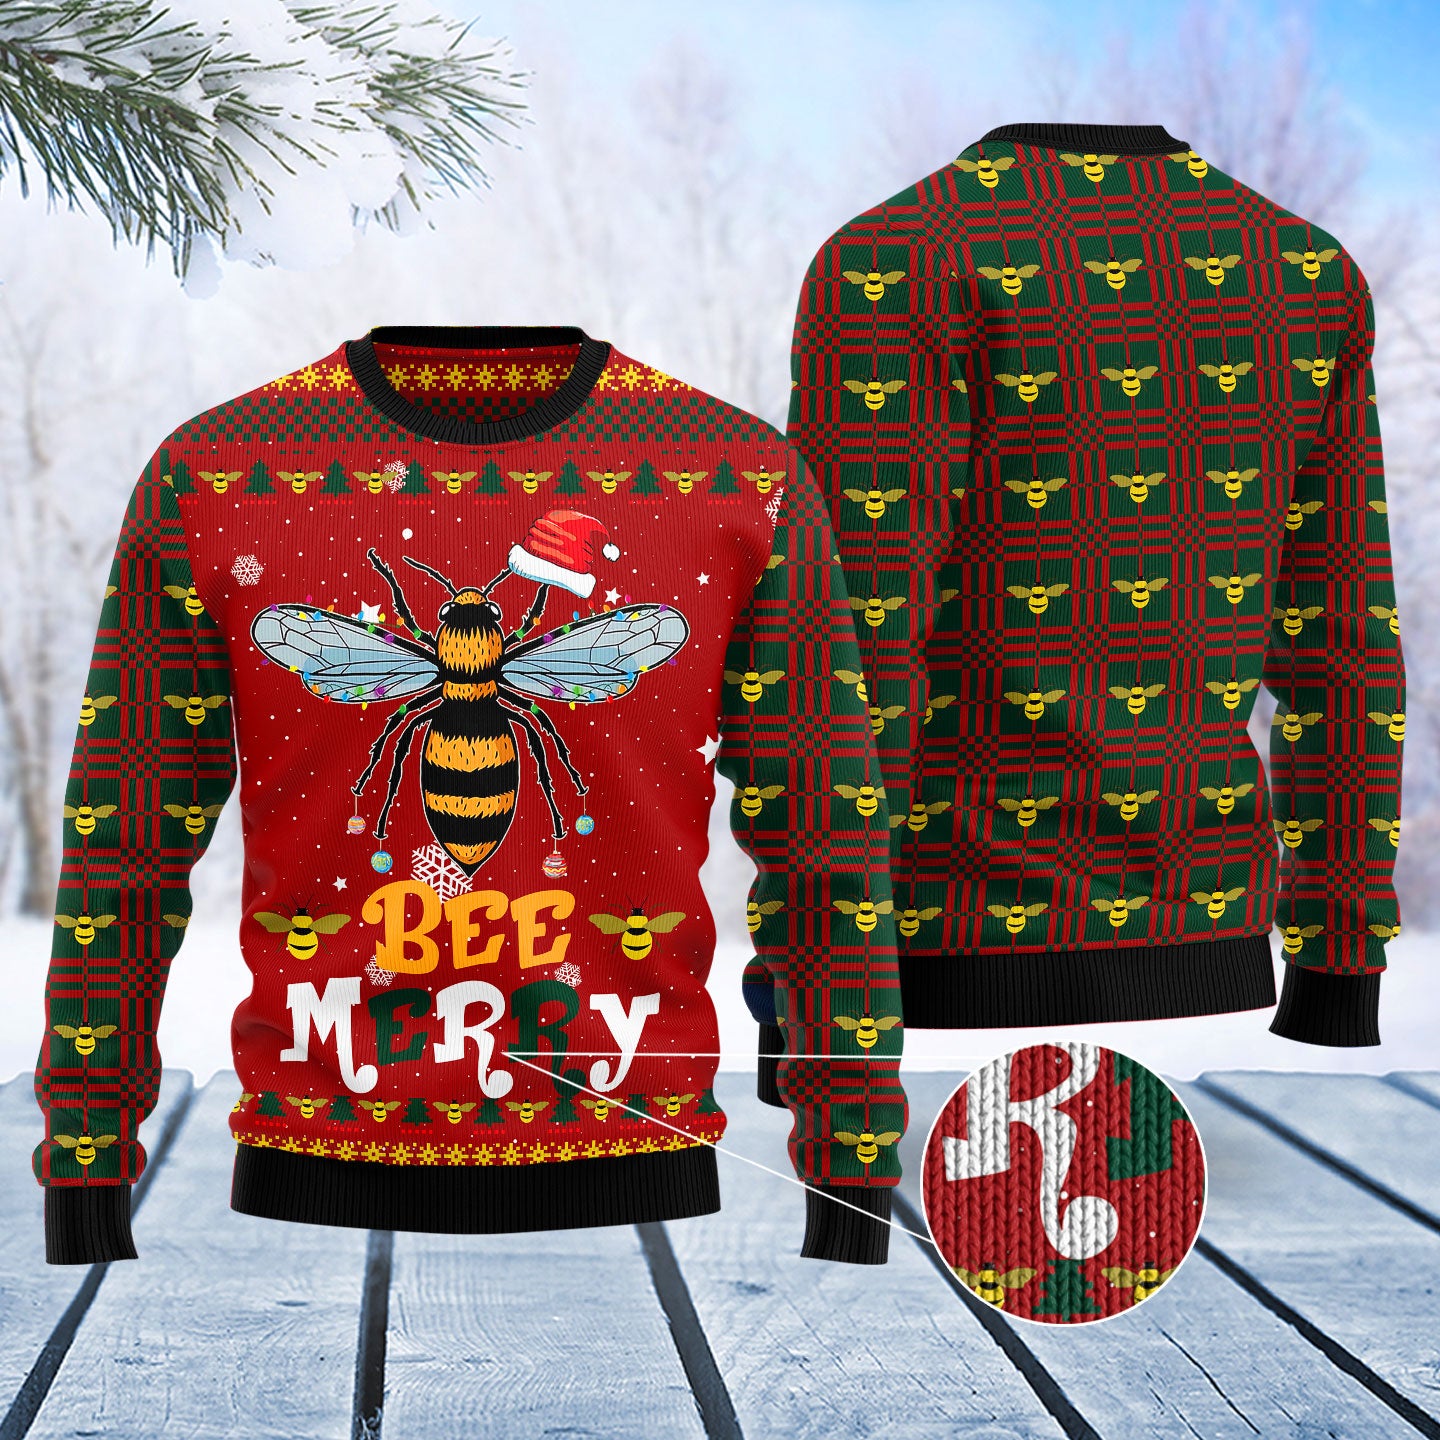 Bee Merry T0211 Ugly Christmas Sweater